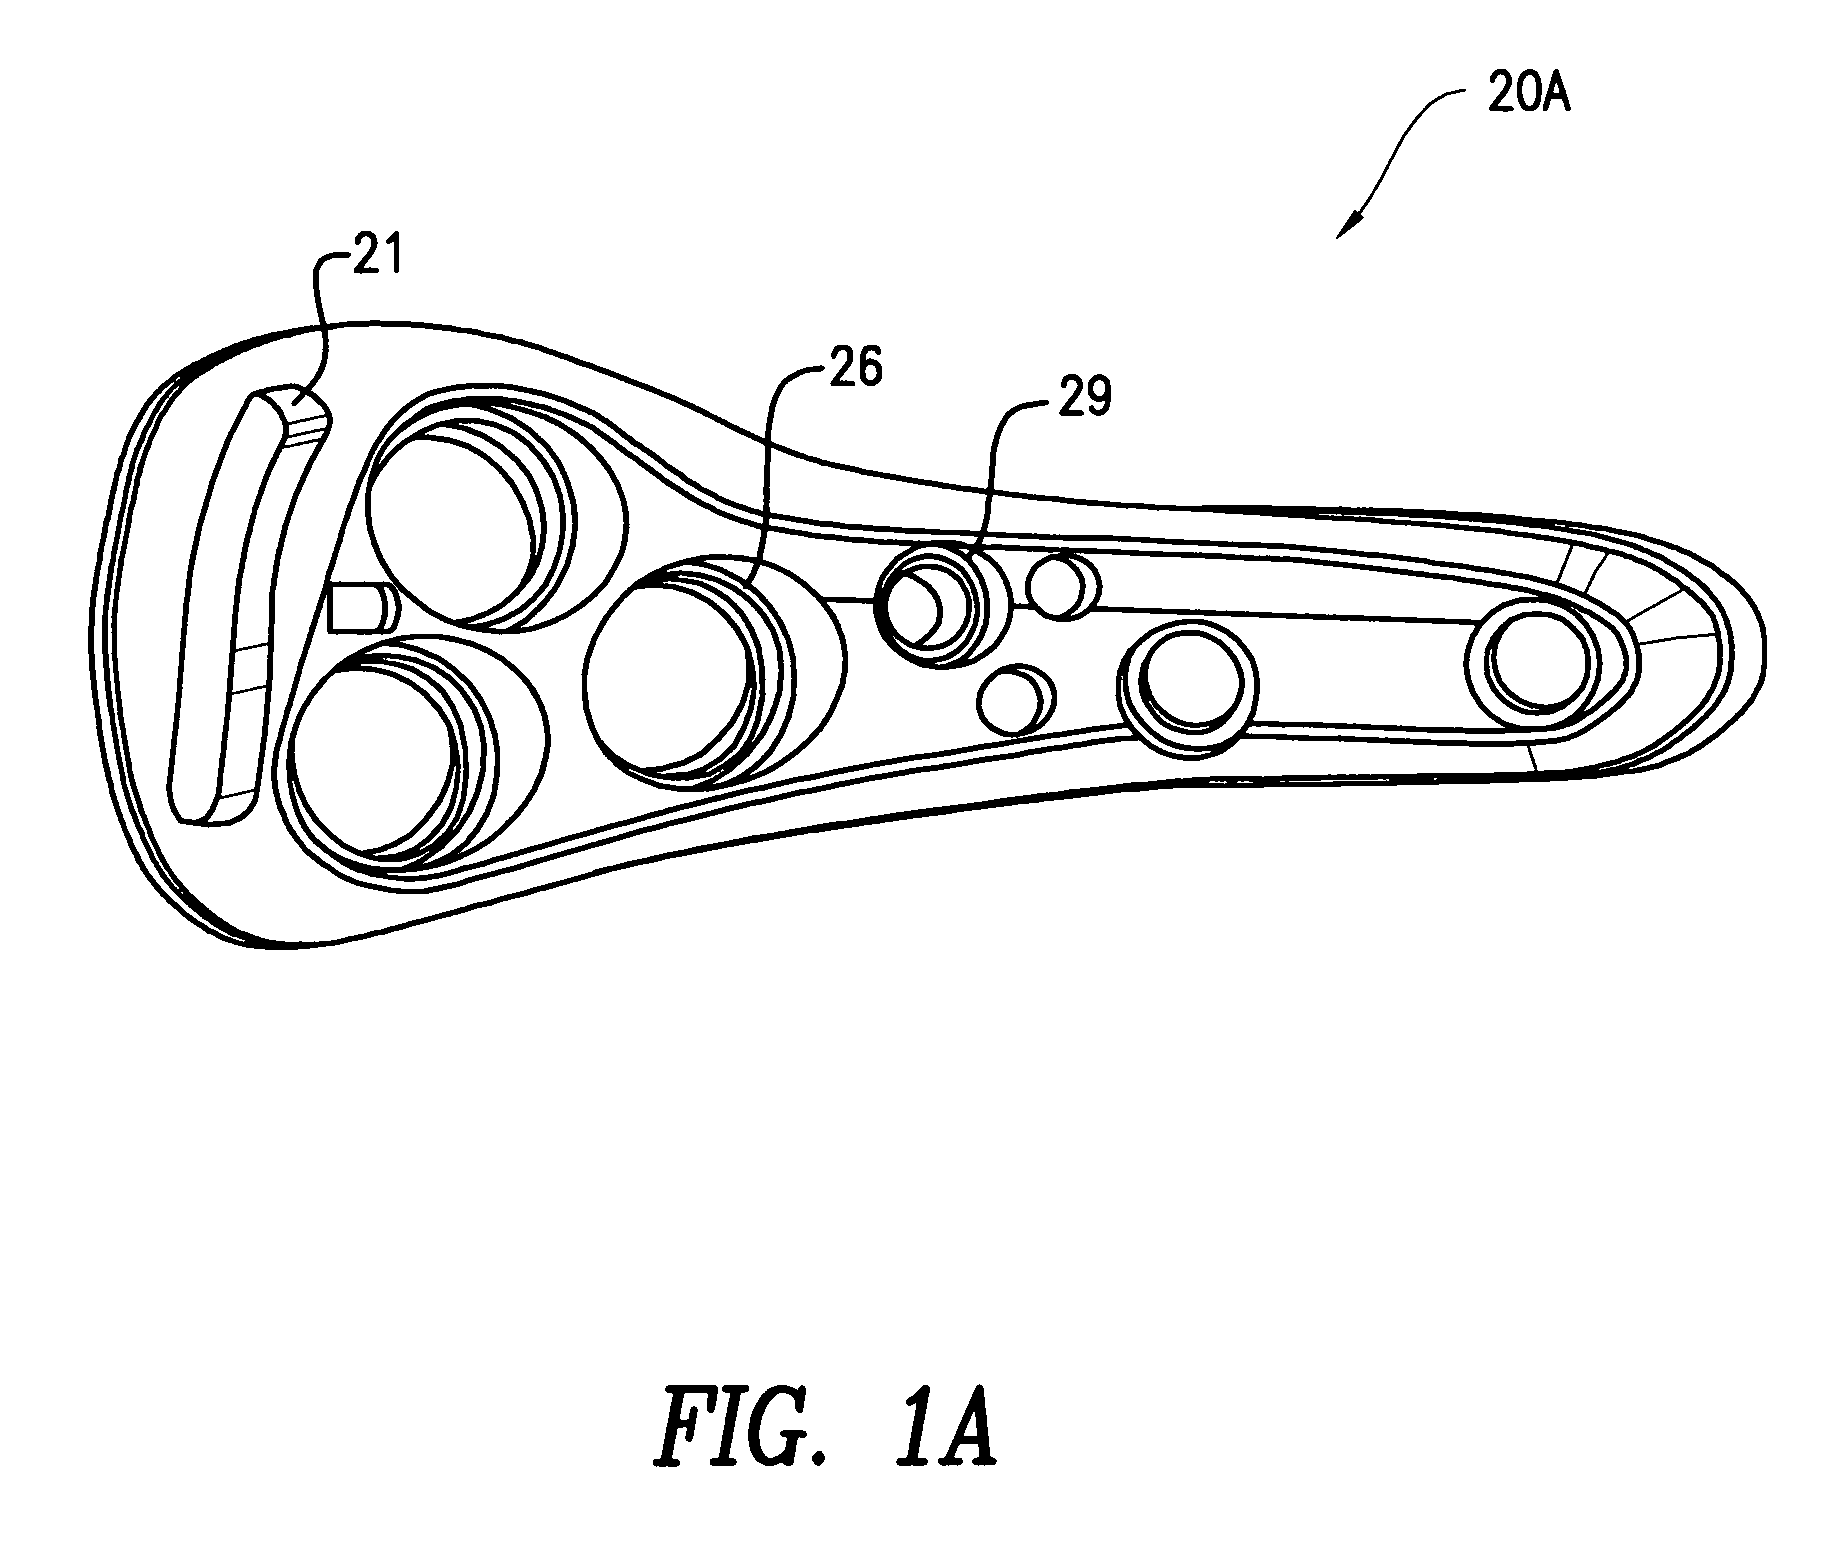 Hip fracture device with static locking mechanism allowing compression